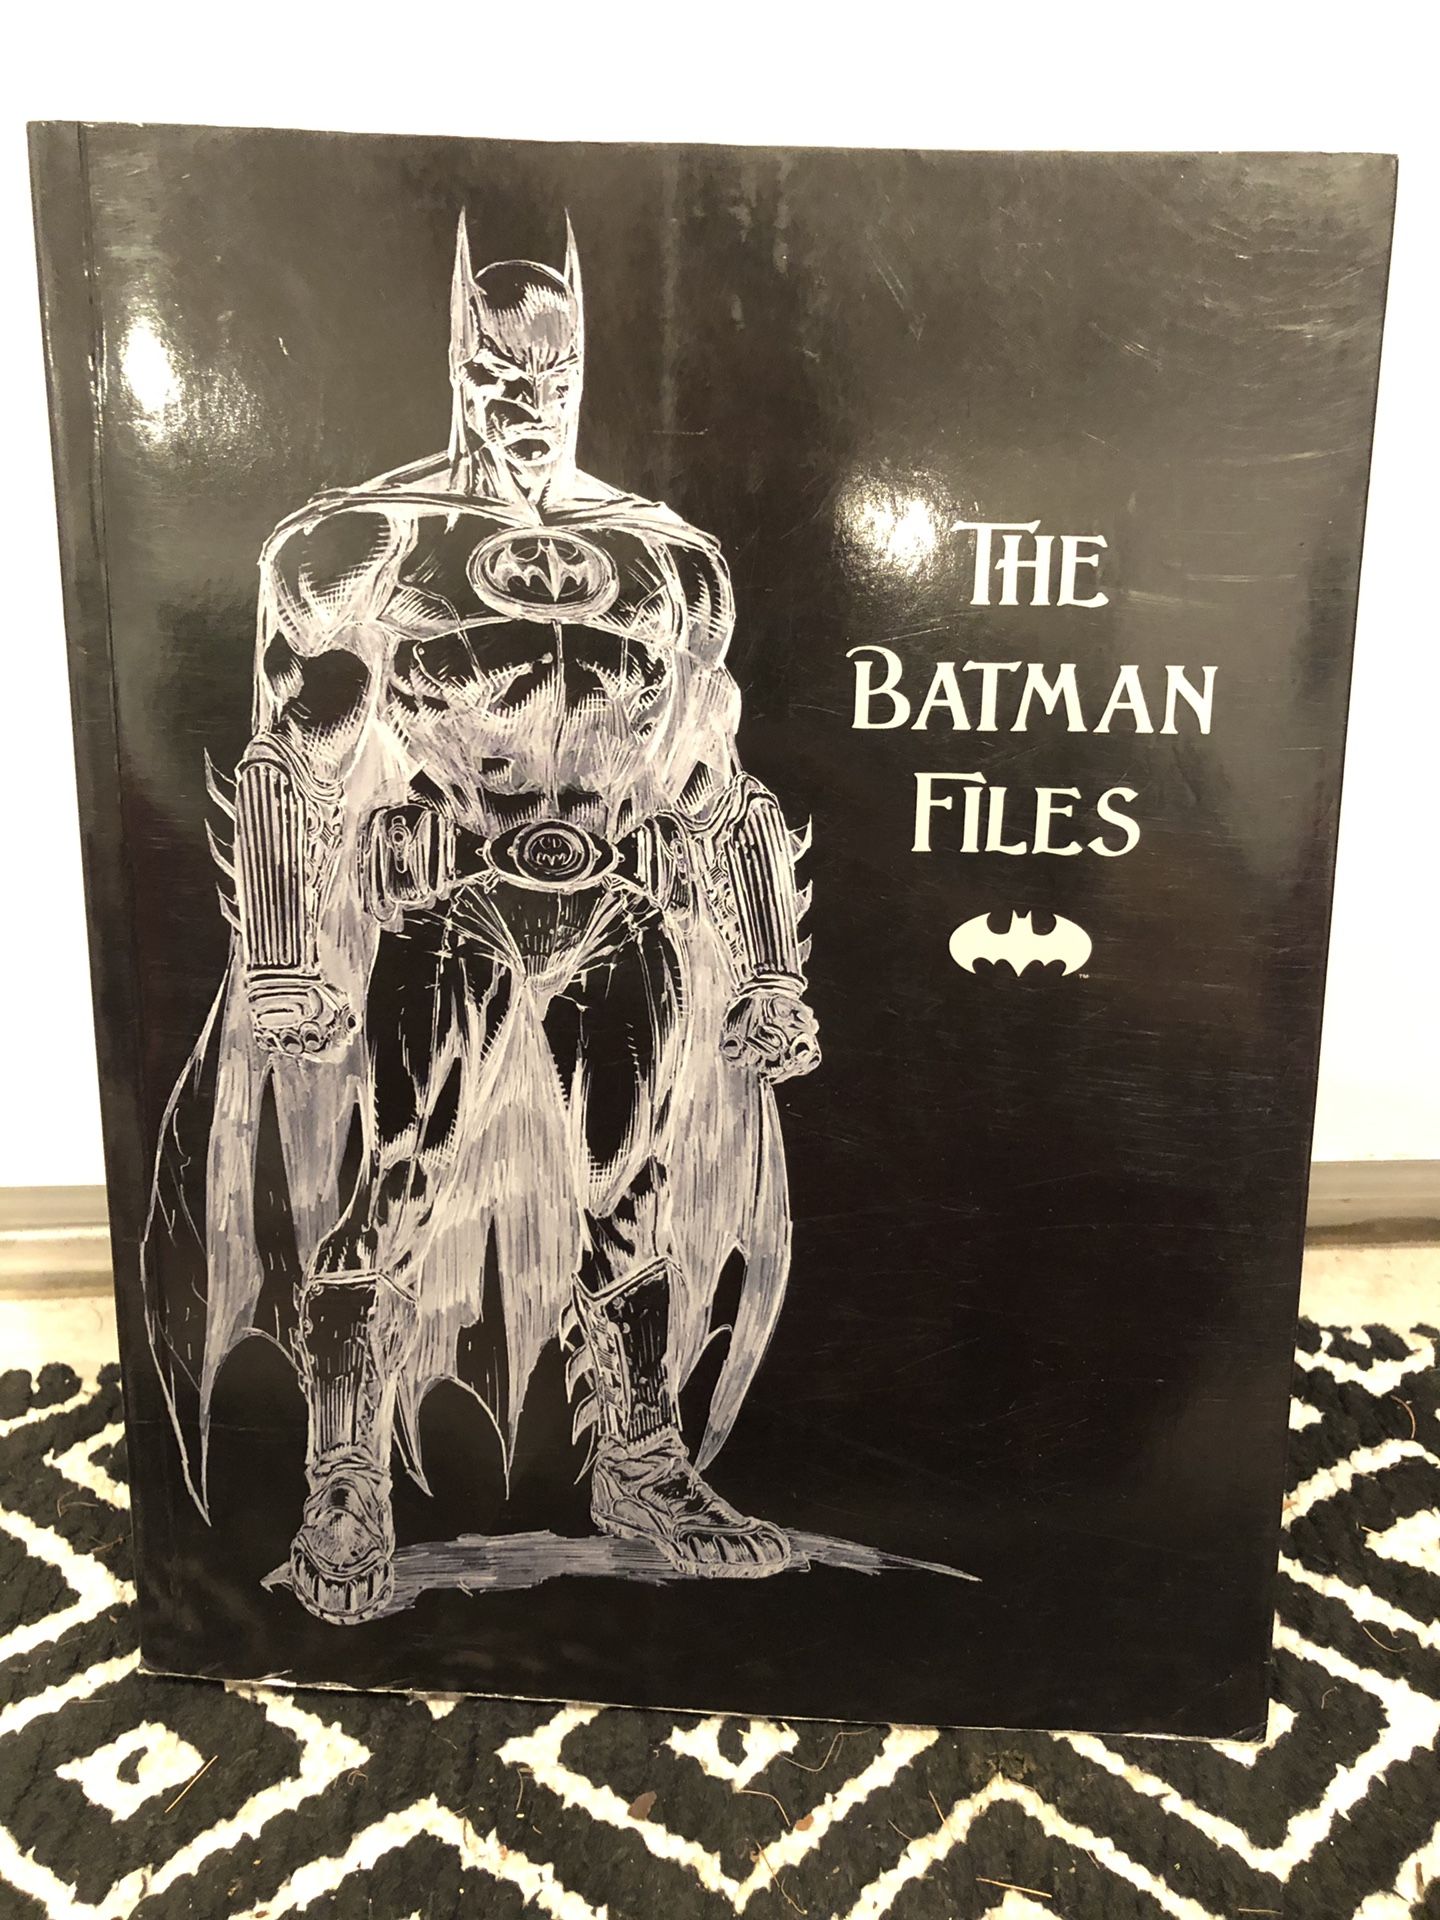 Batman Files book with Pictures